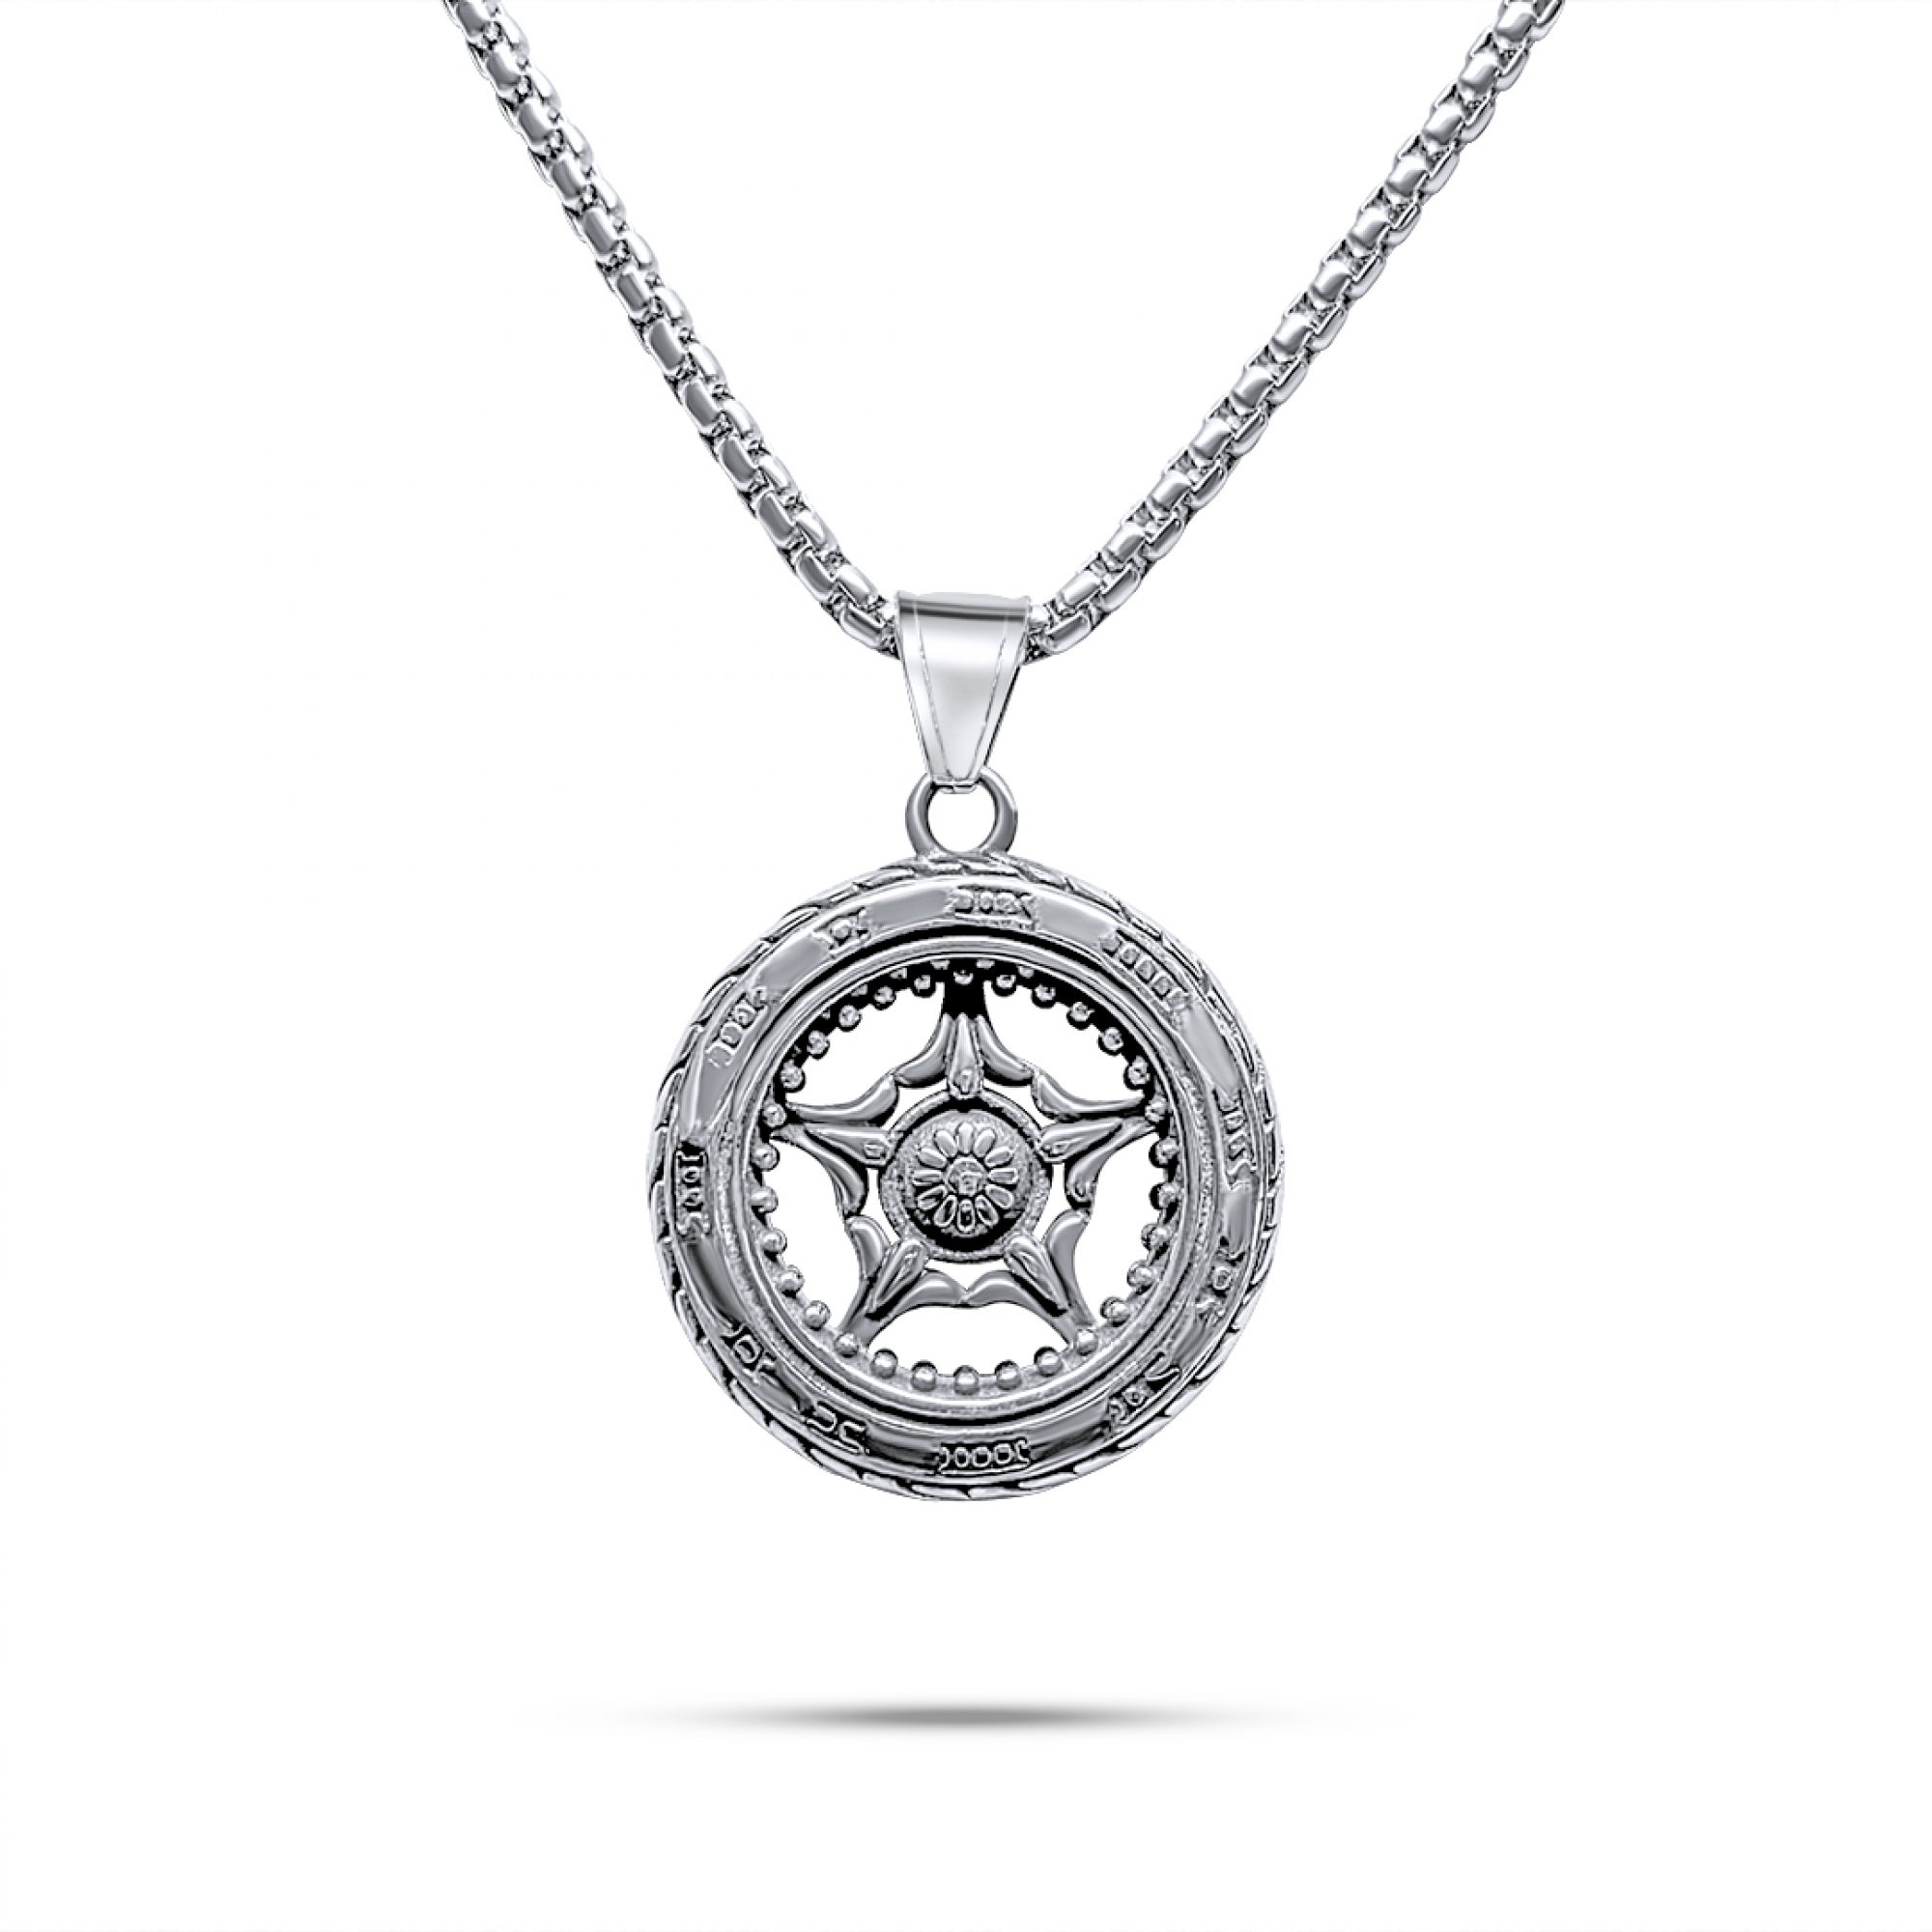 Steel compass necklace